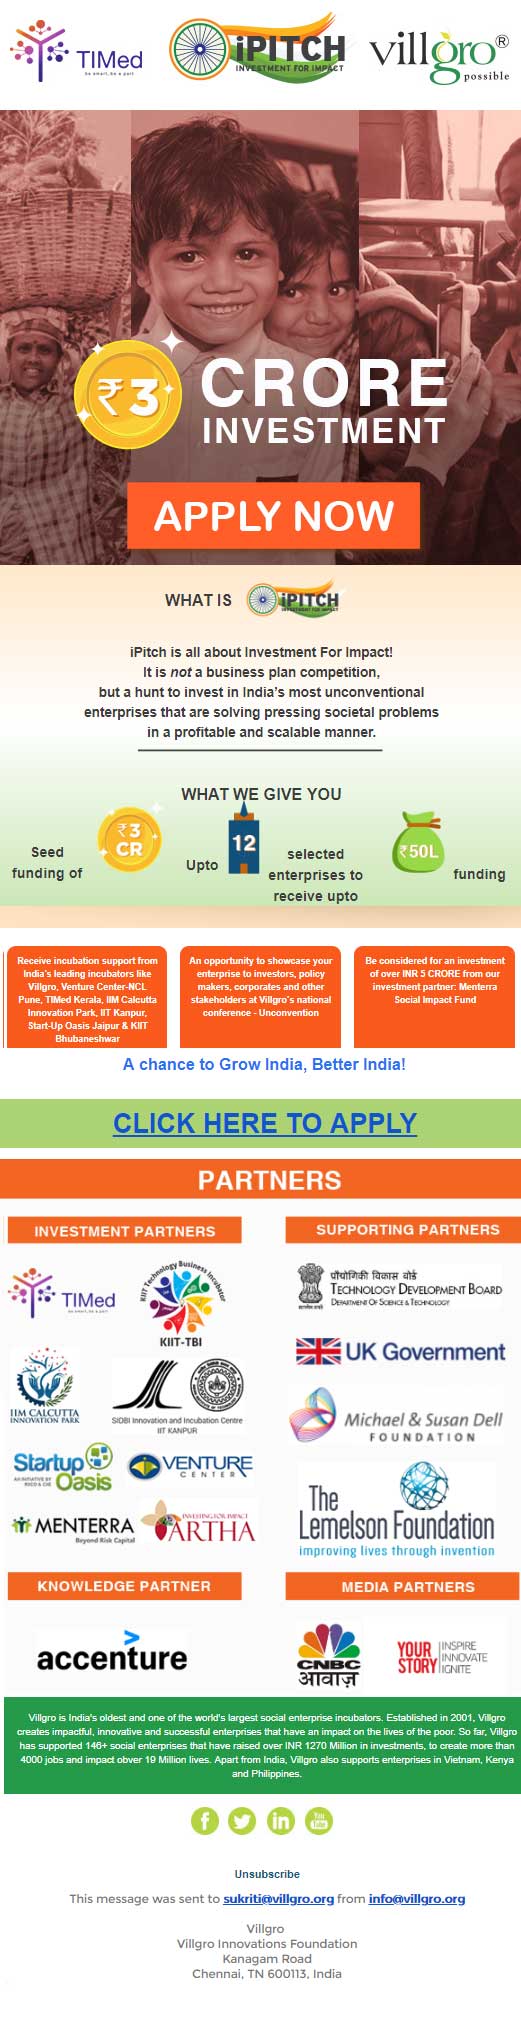 We are excited to partner with @Villgro for  iPitch 2018. Rs. 3 Crore investment and MORE! Applications are open! Apply now: http://villgro.org/ipitch/